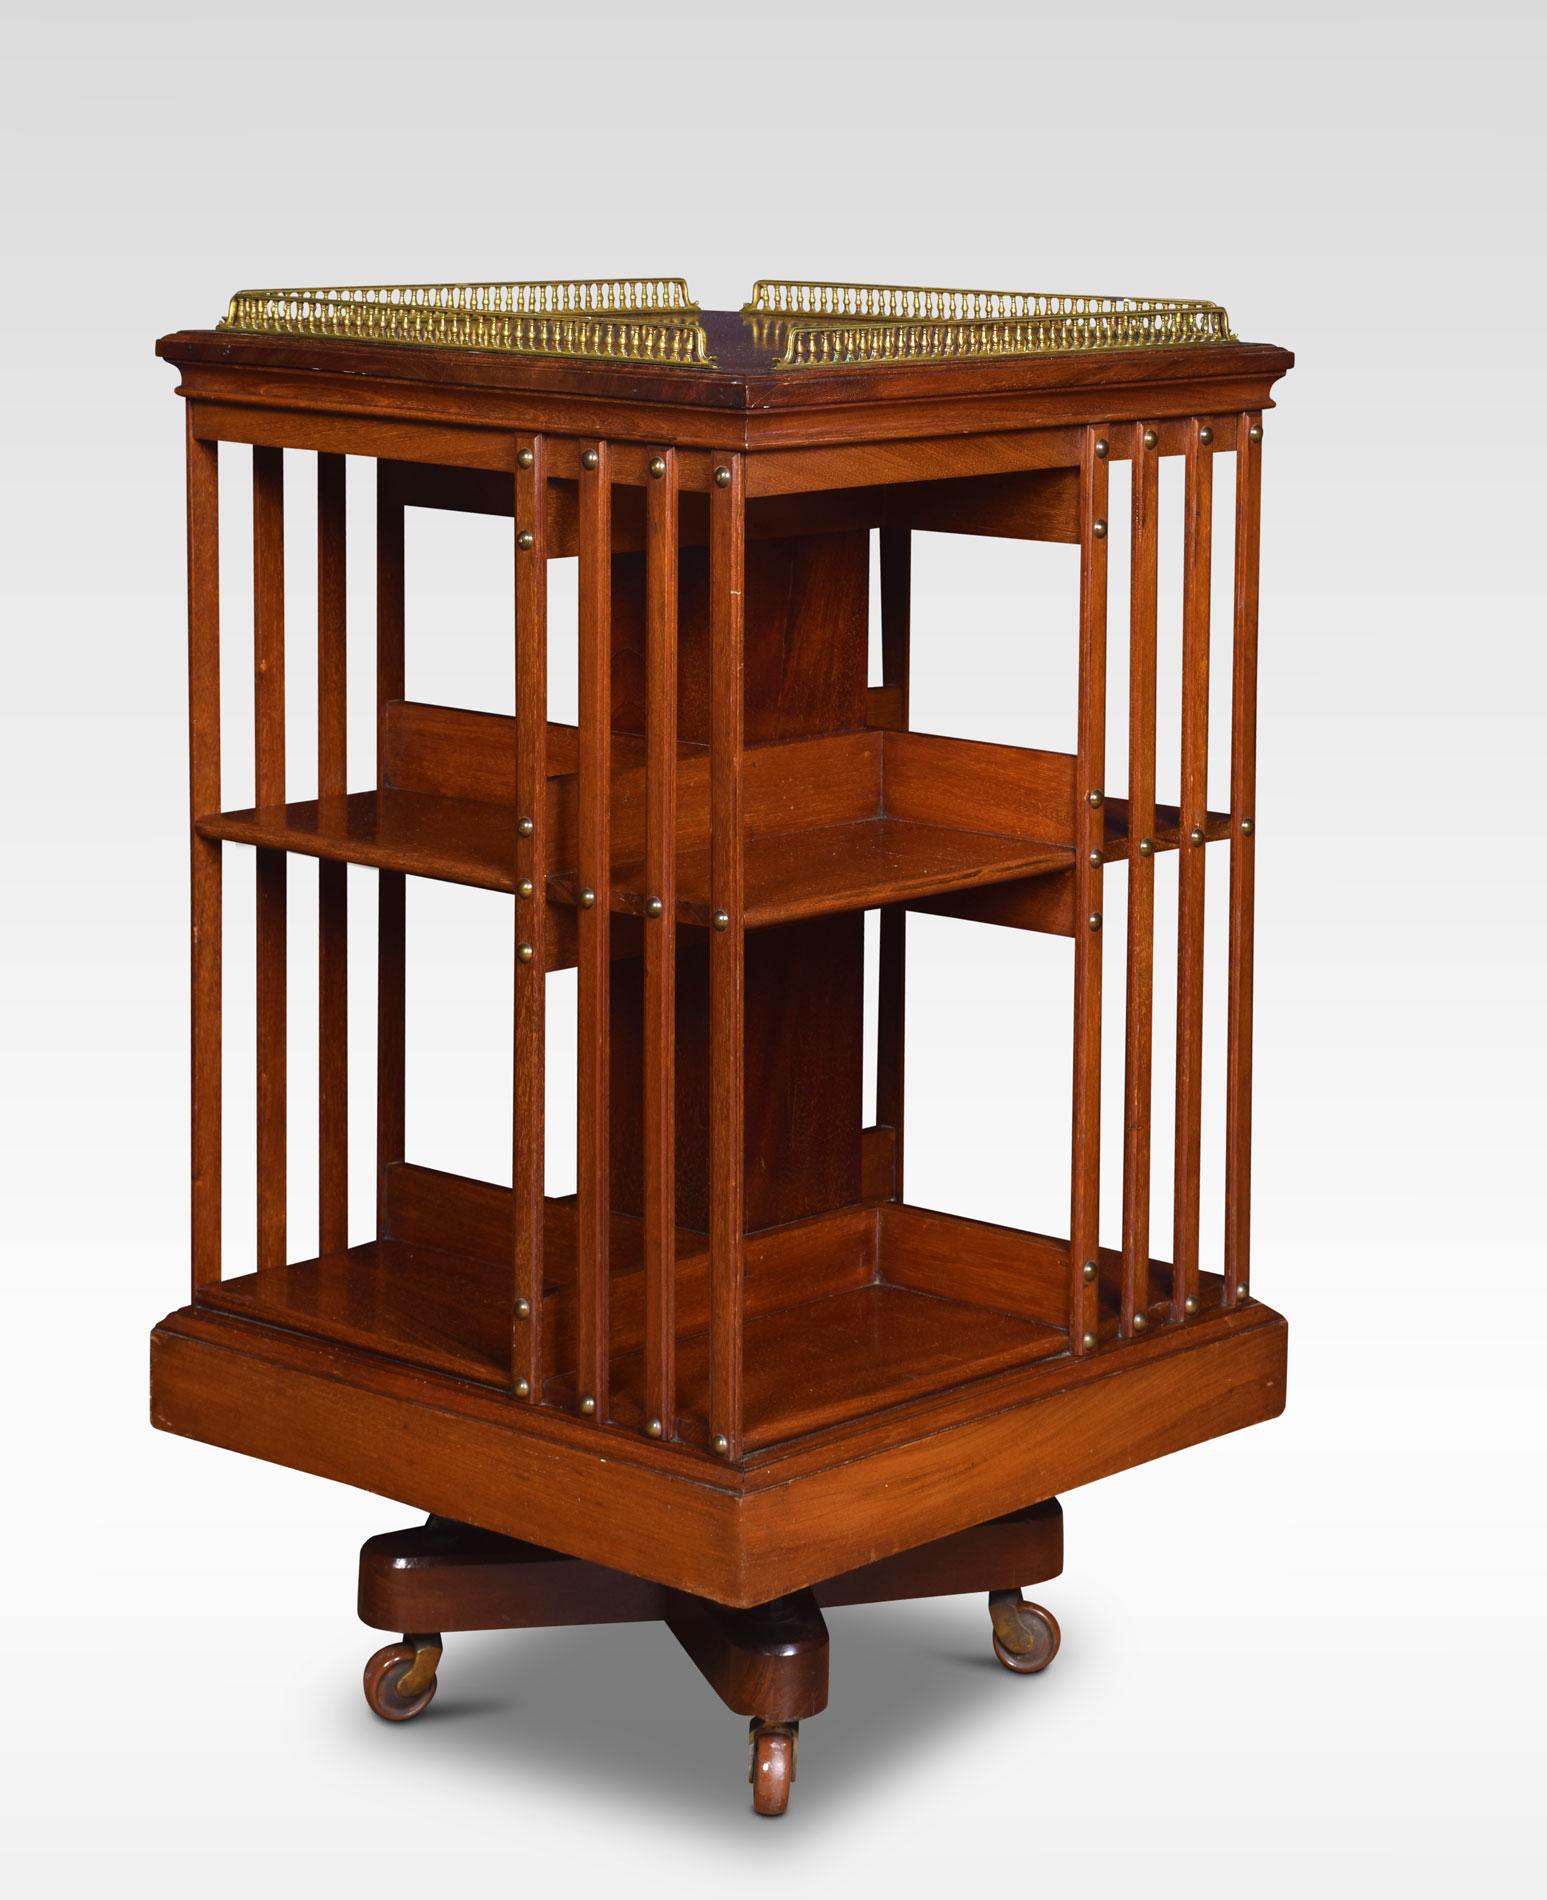 Mahogany revolving bookcase the unusual raised brass gallery top above an arrangement off shelves raised up on a cruciform metal base with castors by Maple & Co.
Dimensions:
Height 35 inches
Width 20 inches
Depth 20 inches.